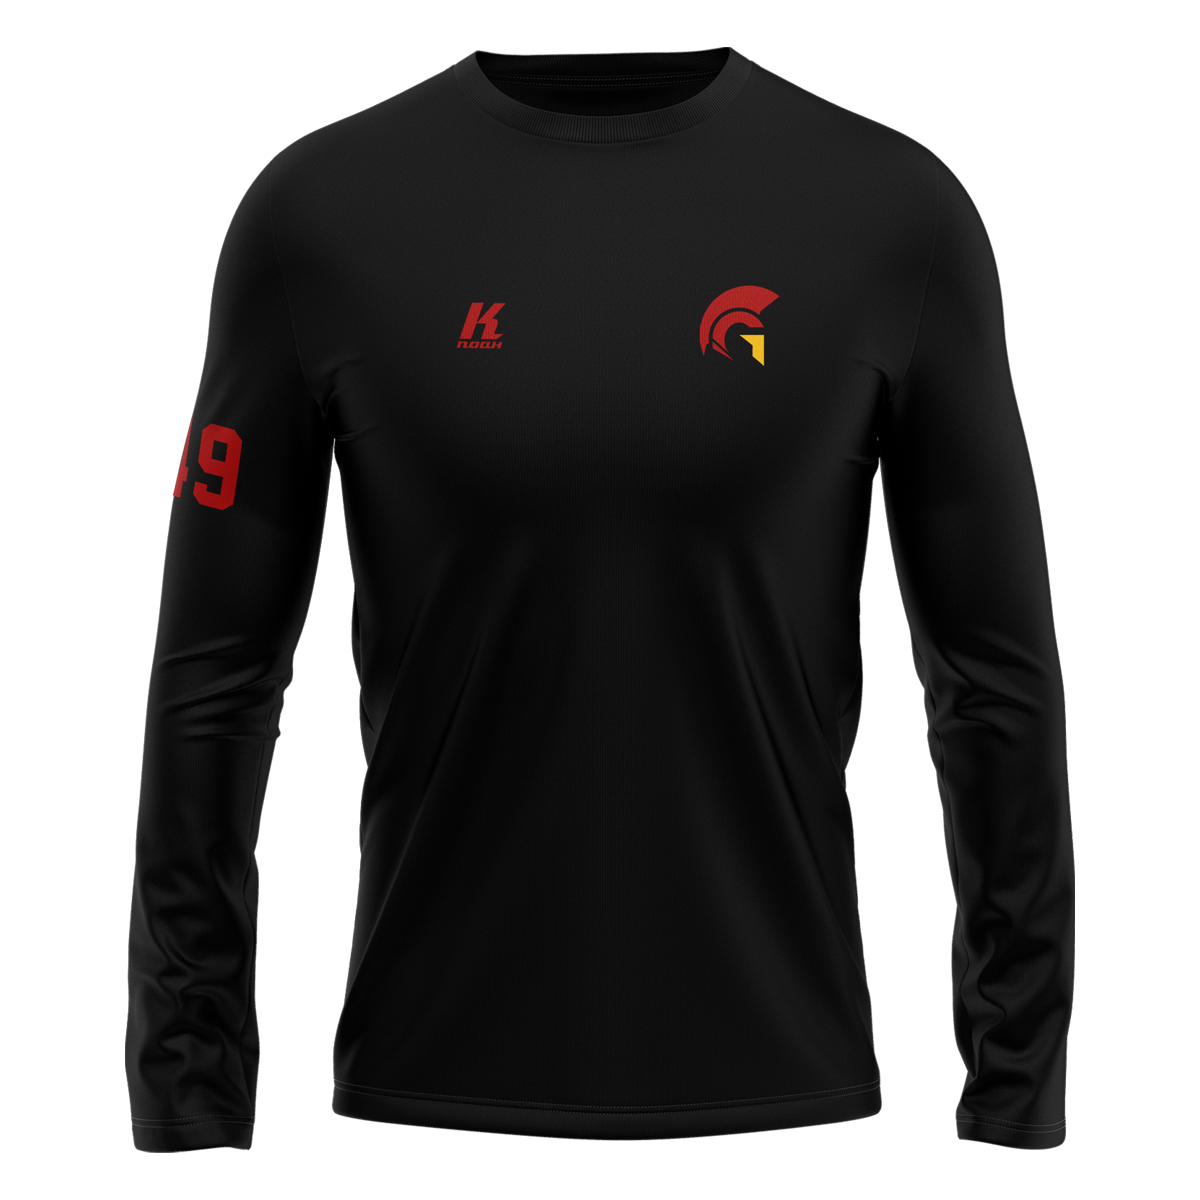 Gladiators Basic Longsleeve Tee Primary with Playernumber/Initials